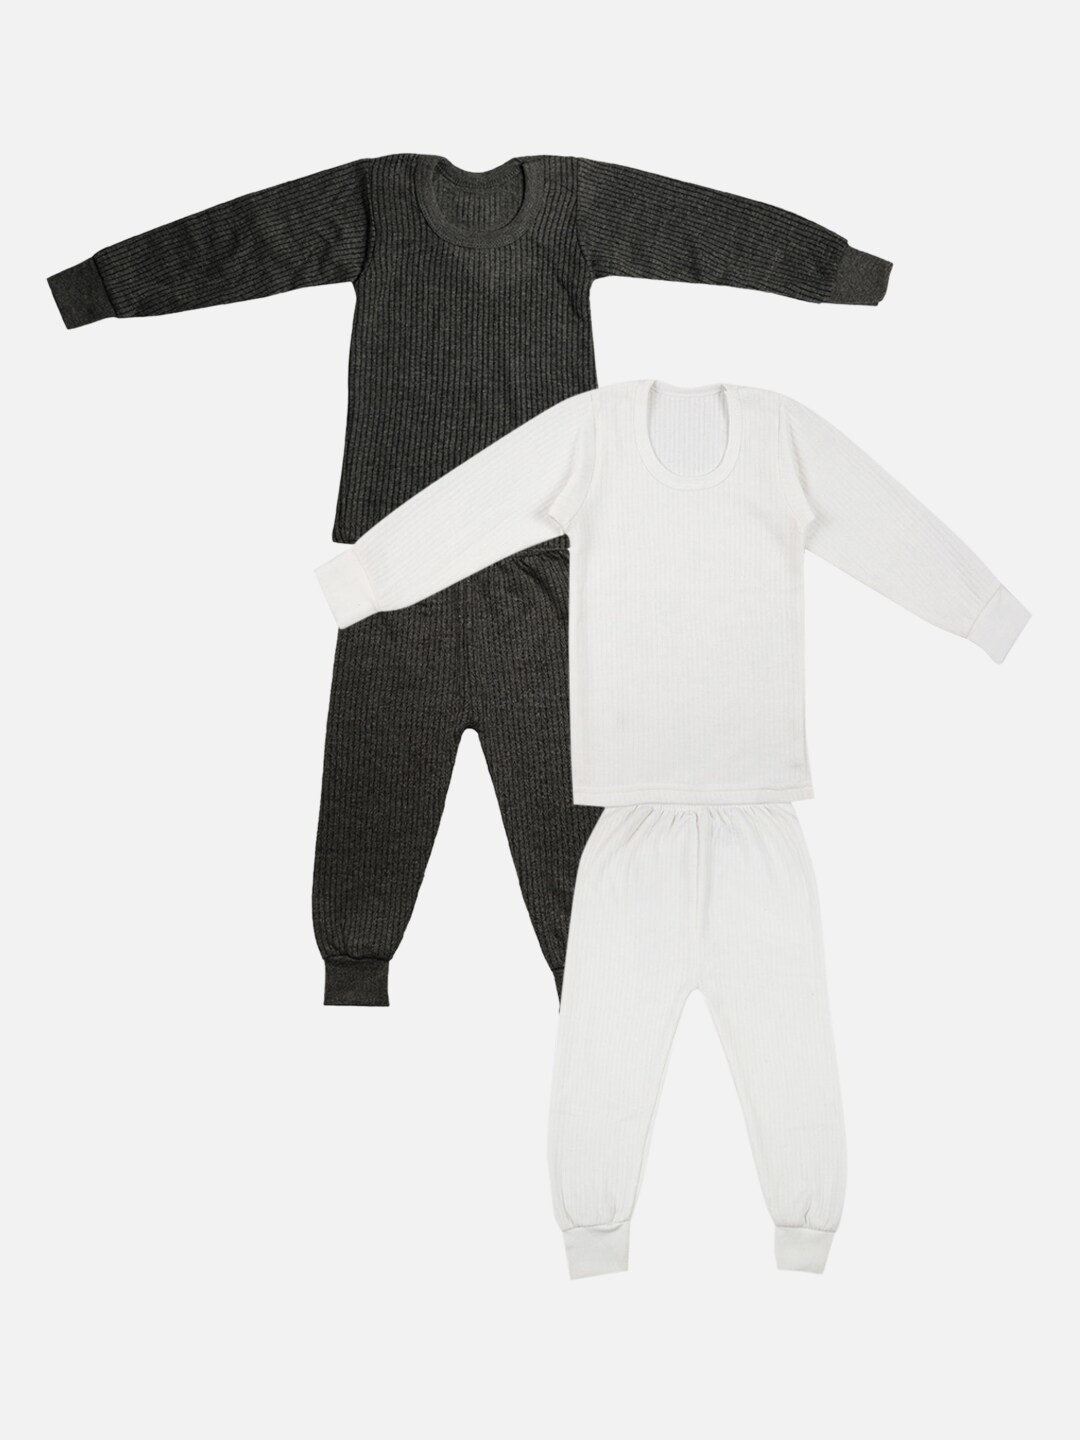 TINY HUG Boys Pack Of 3 Assorted Cotton Thermal Set